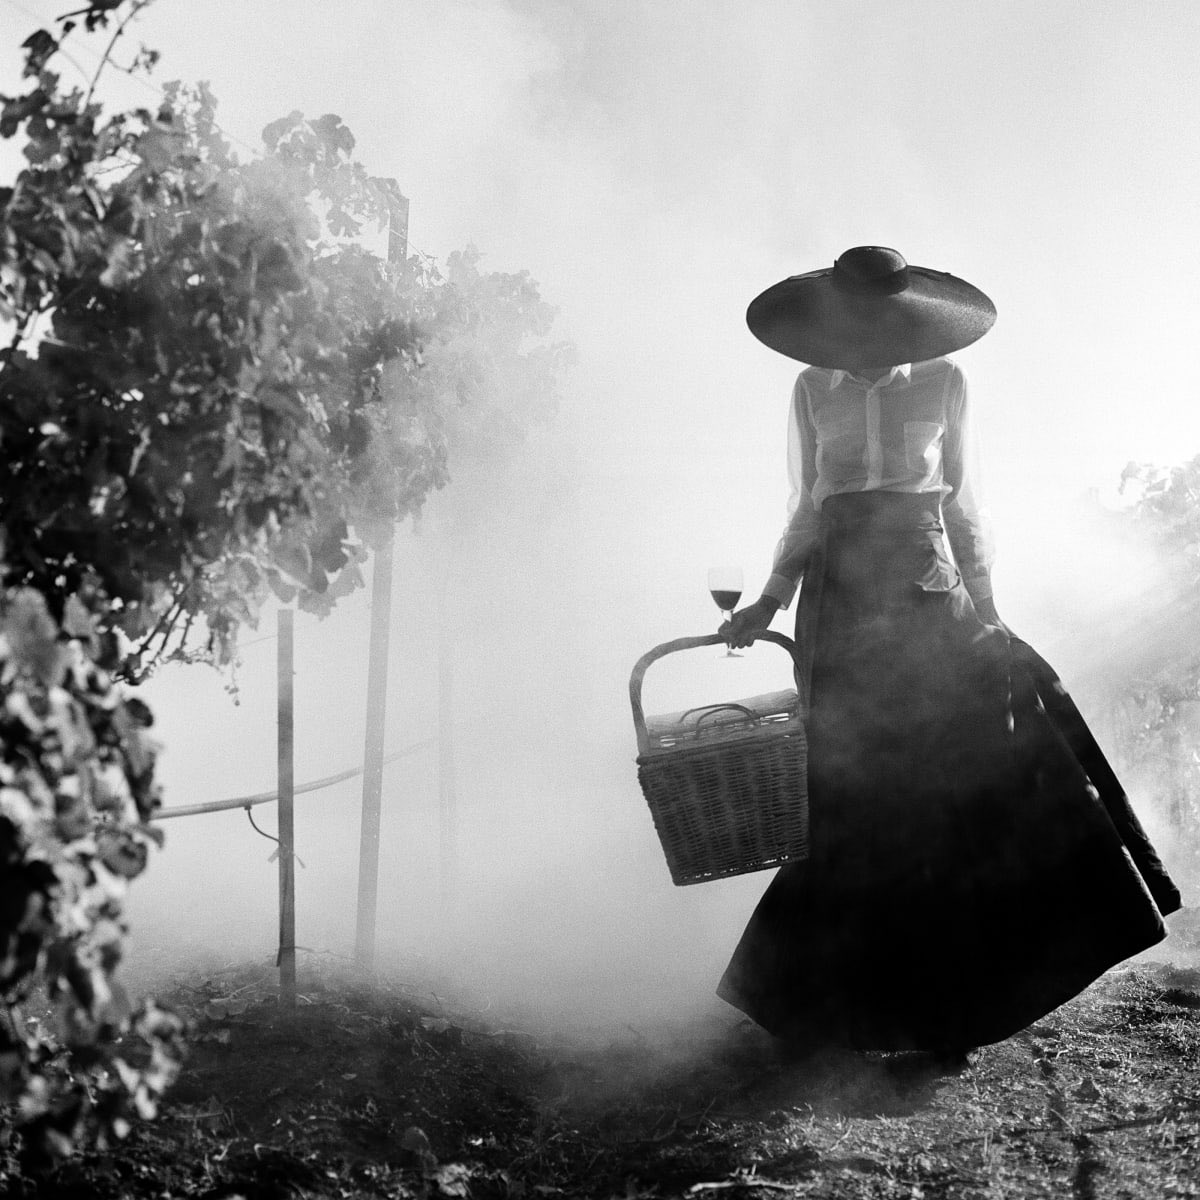 ‘The good life is one inspired by love 
and guided by knowledge.’

Bertrand Russell, What I Believe, 1925

📷 Rodney Smith, Nappa Valley